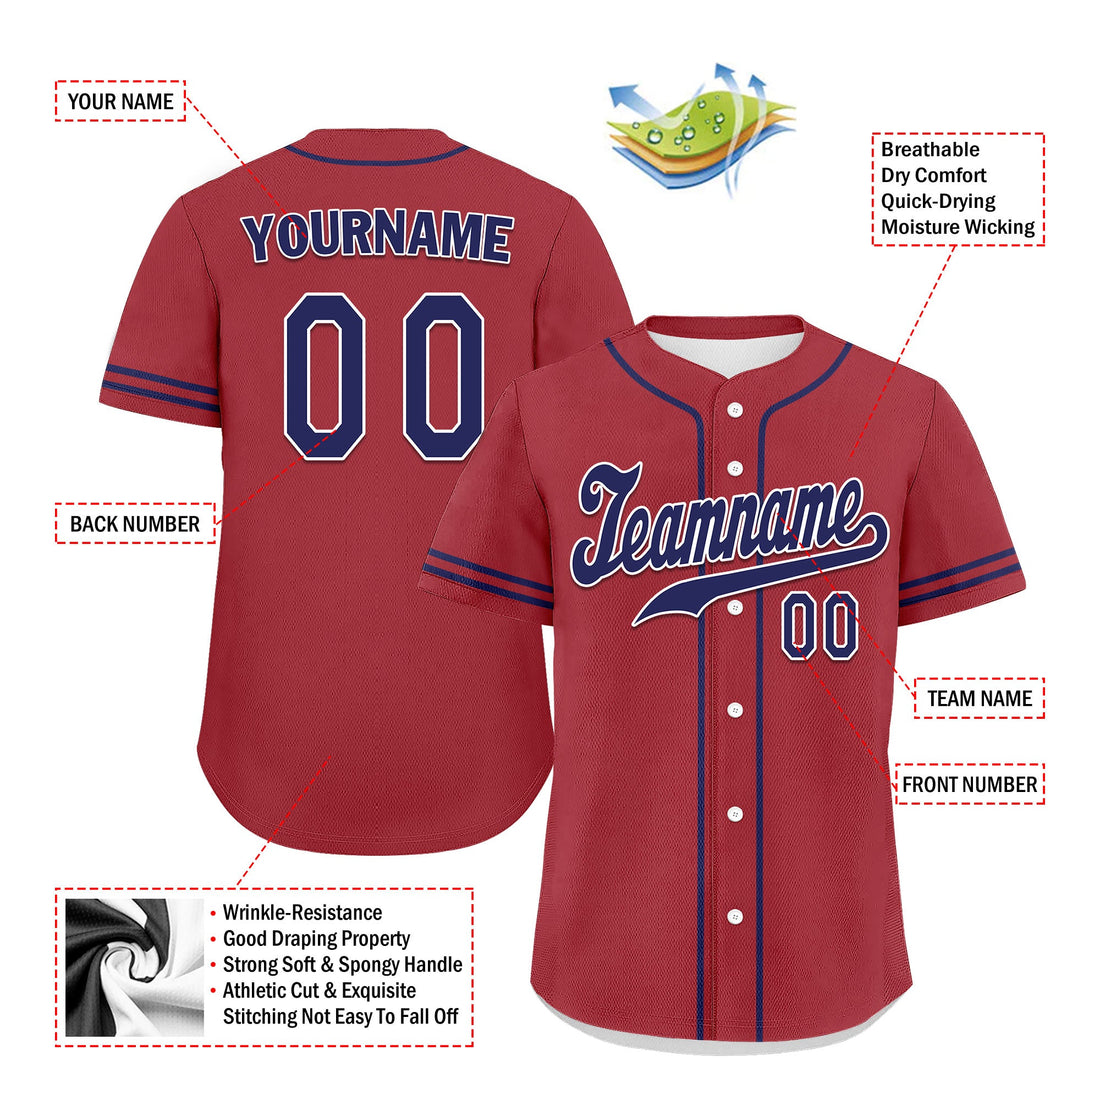 Custom Red Classic Style Blue Personalized Authentic Baseball Jersey UN002-bd0b00d8-ba